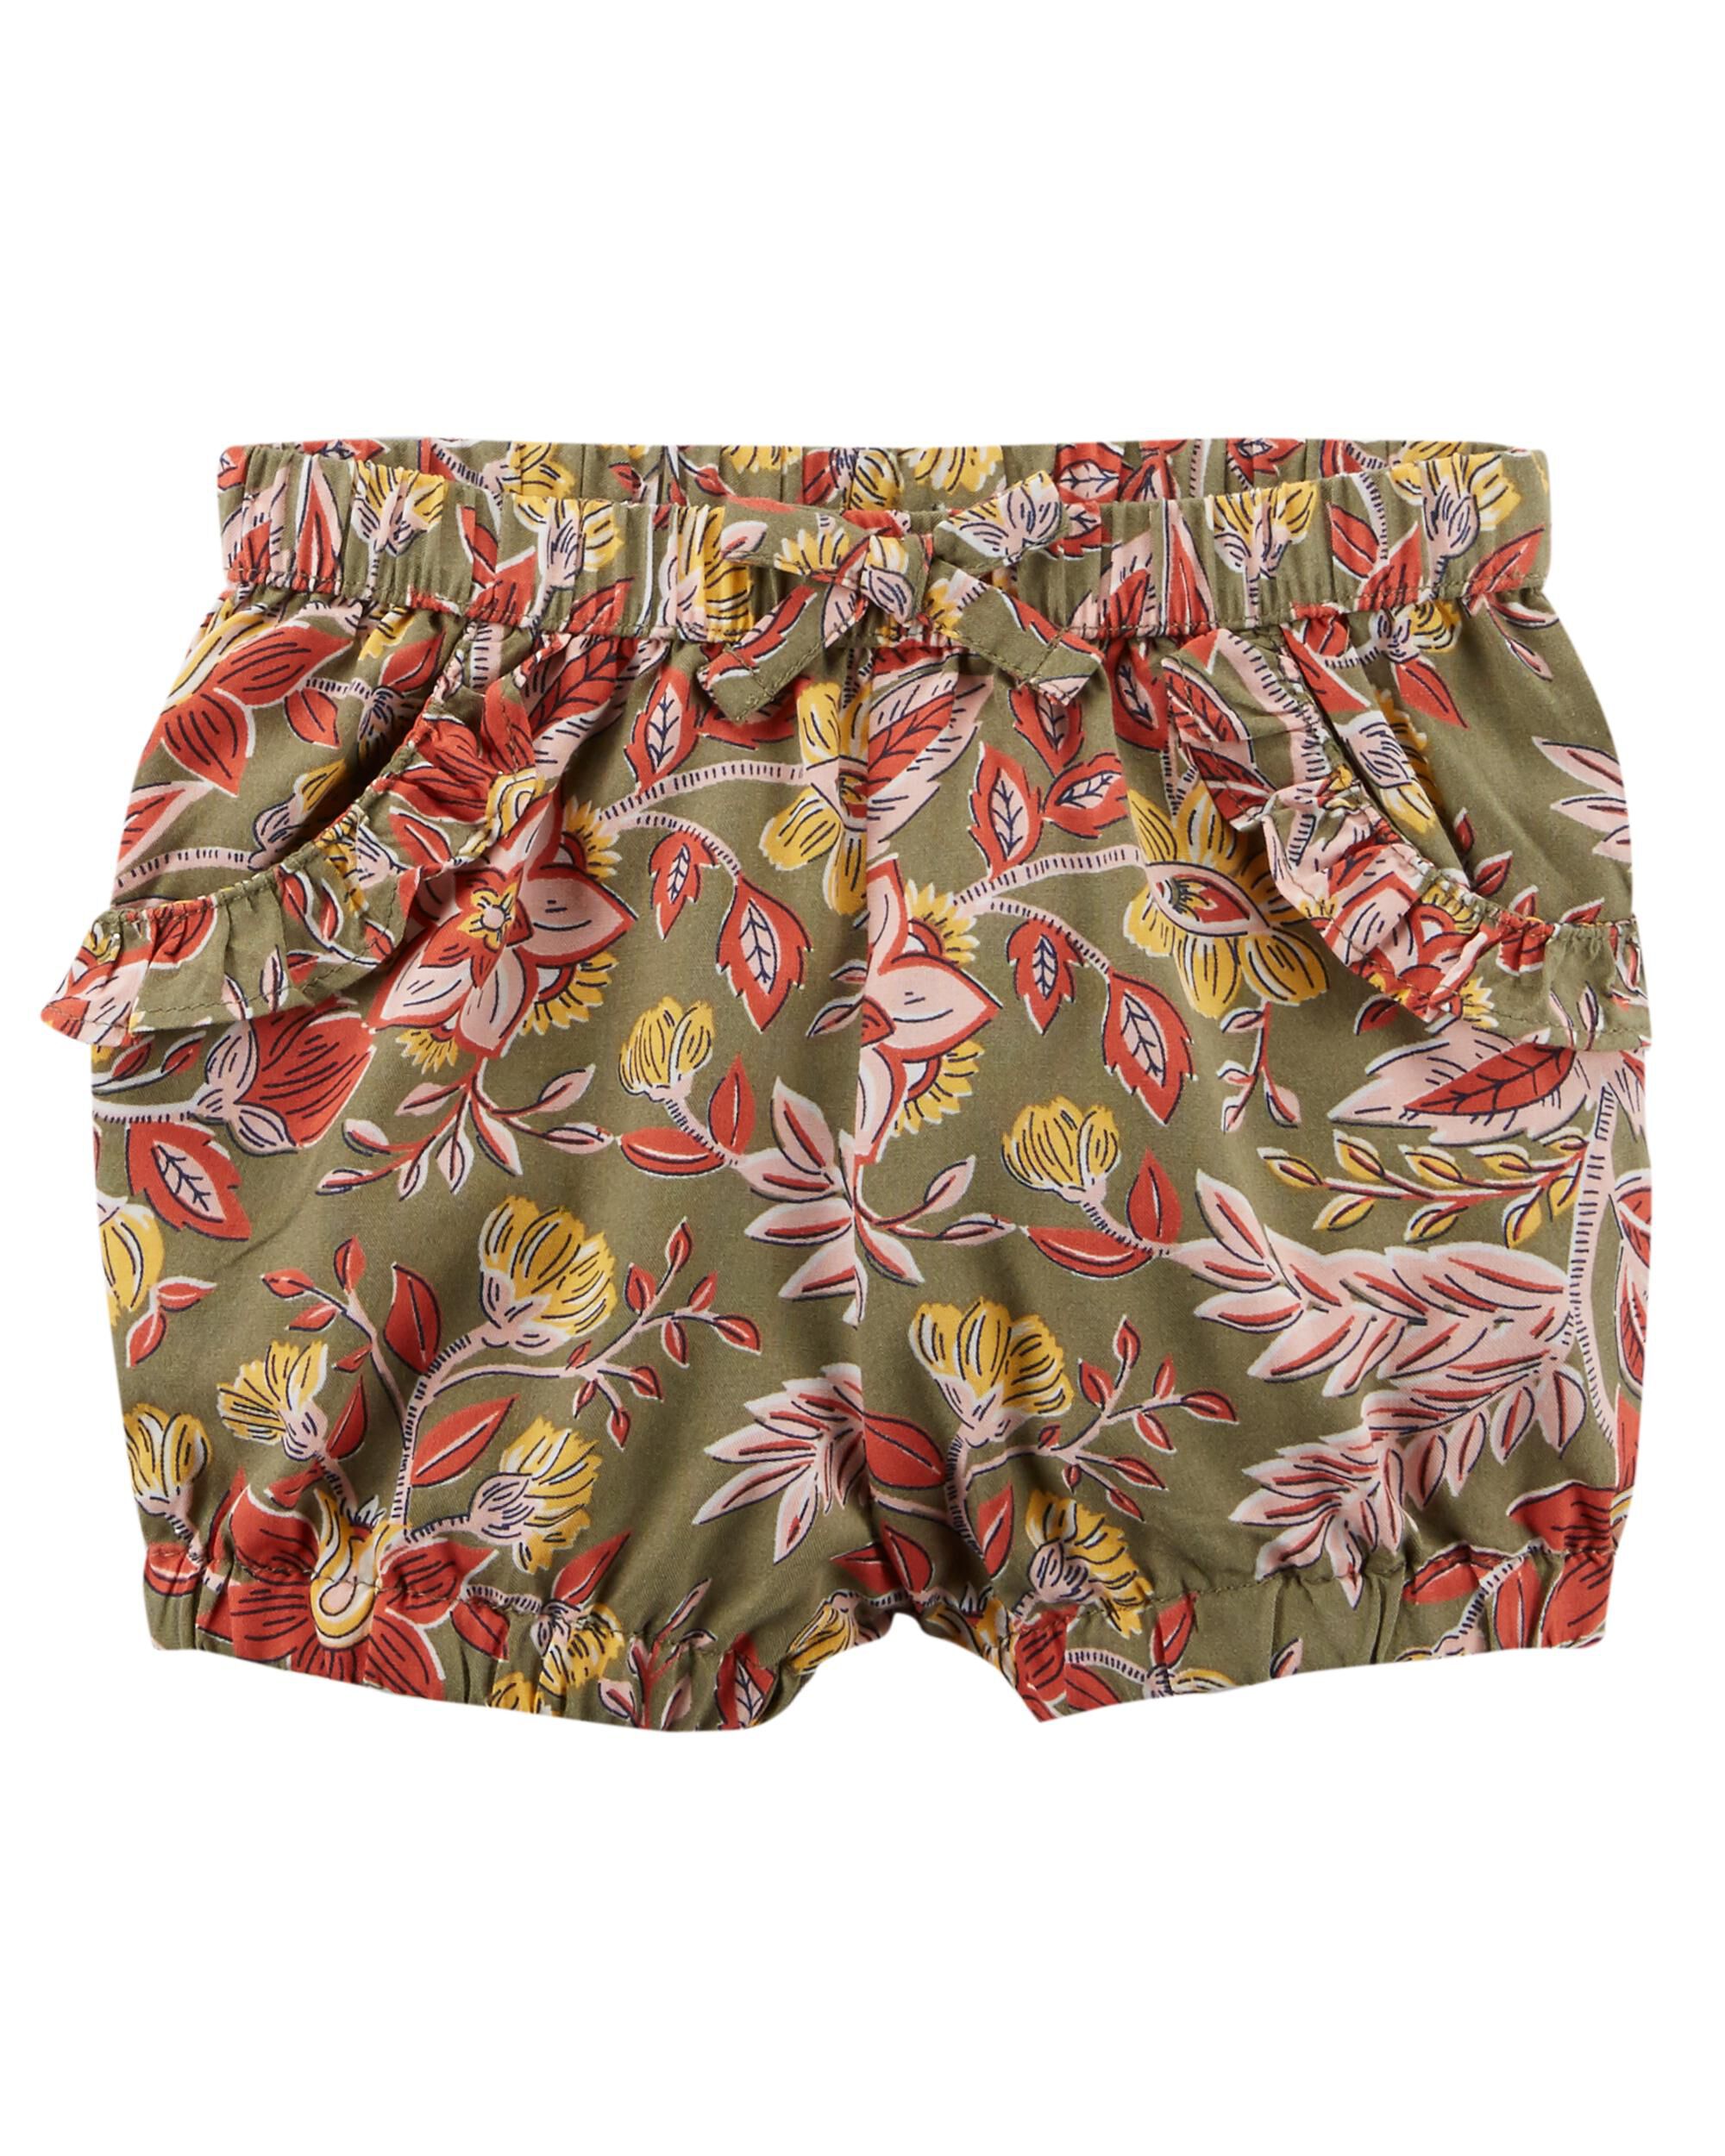 Carters Patterned Pull On Shorts